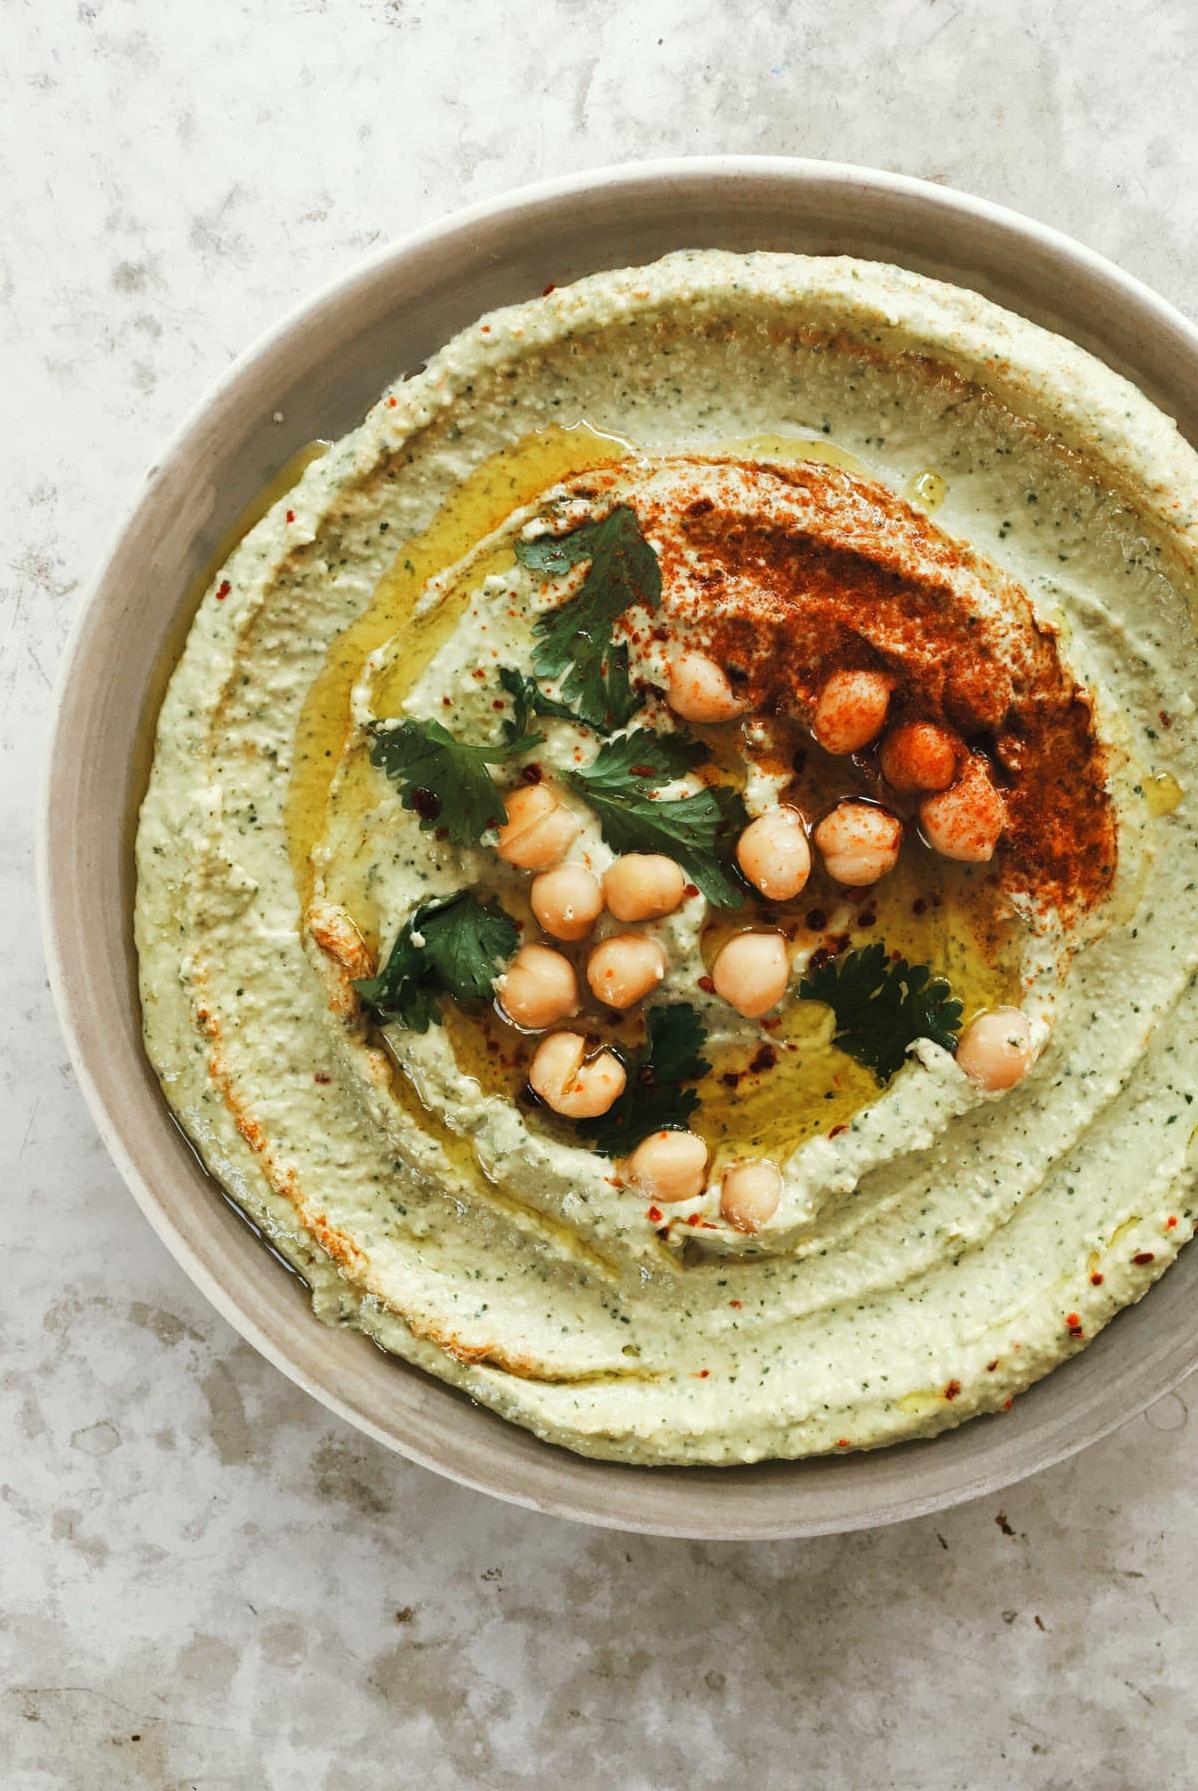  Who needs store-bought hummus when you can make your own with this easy recipe?